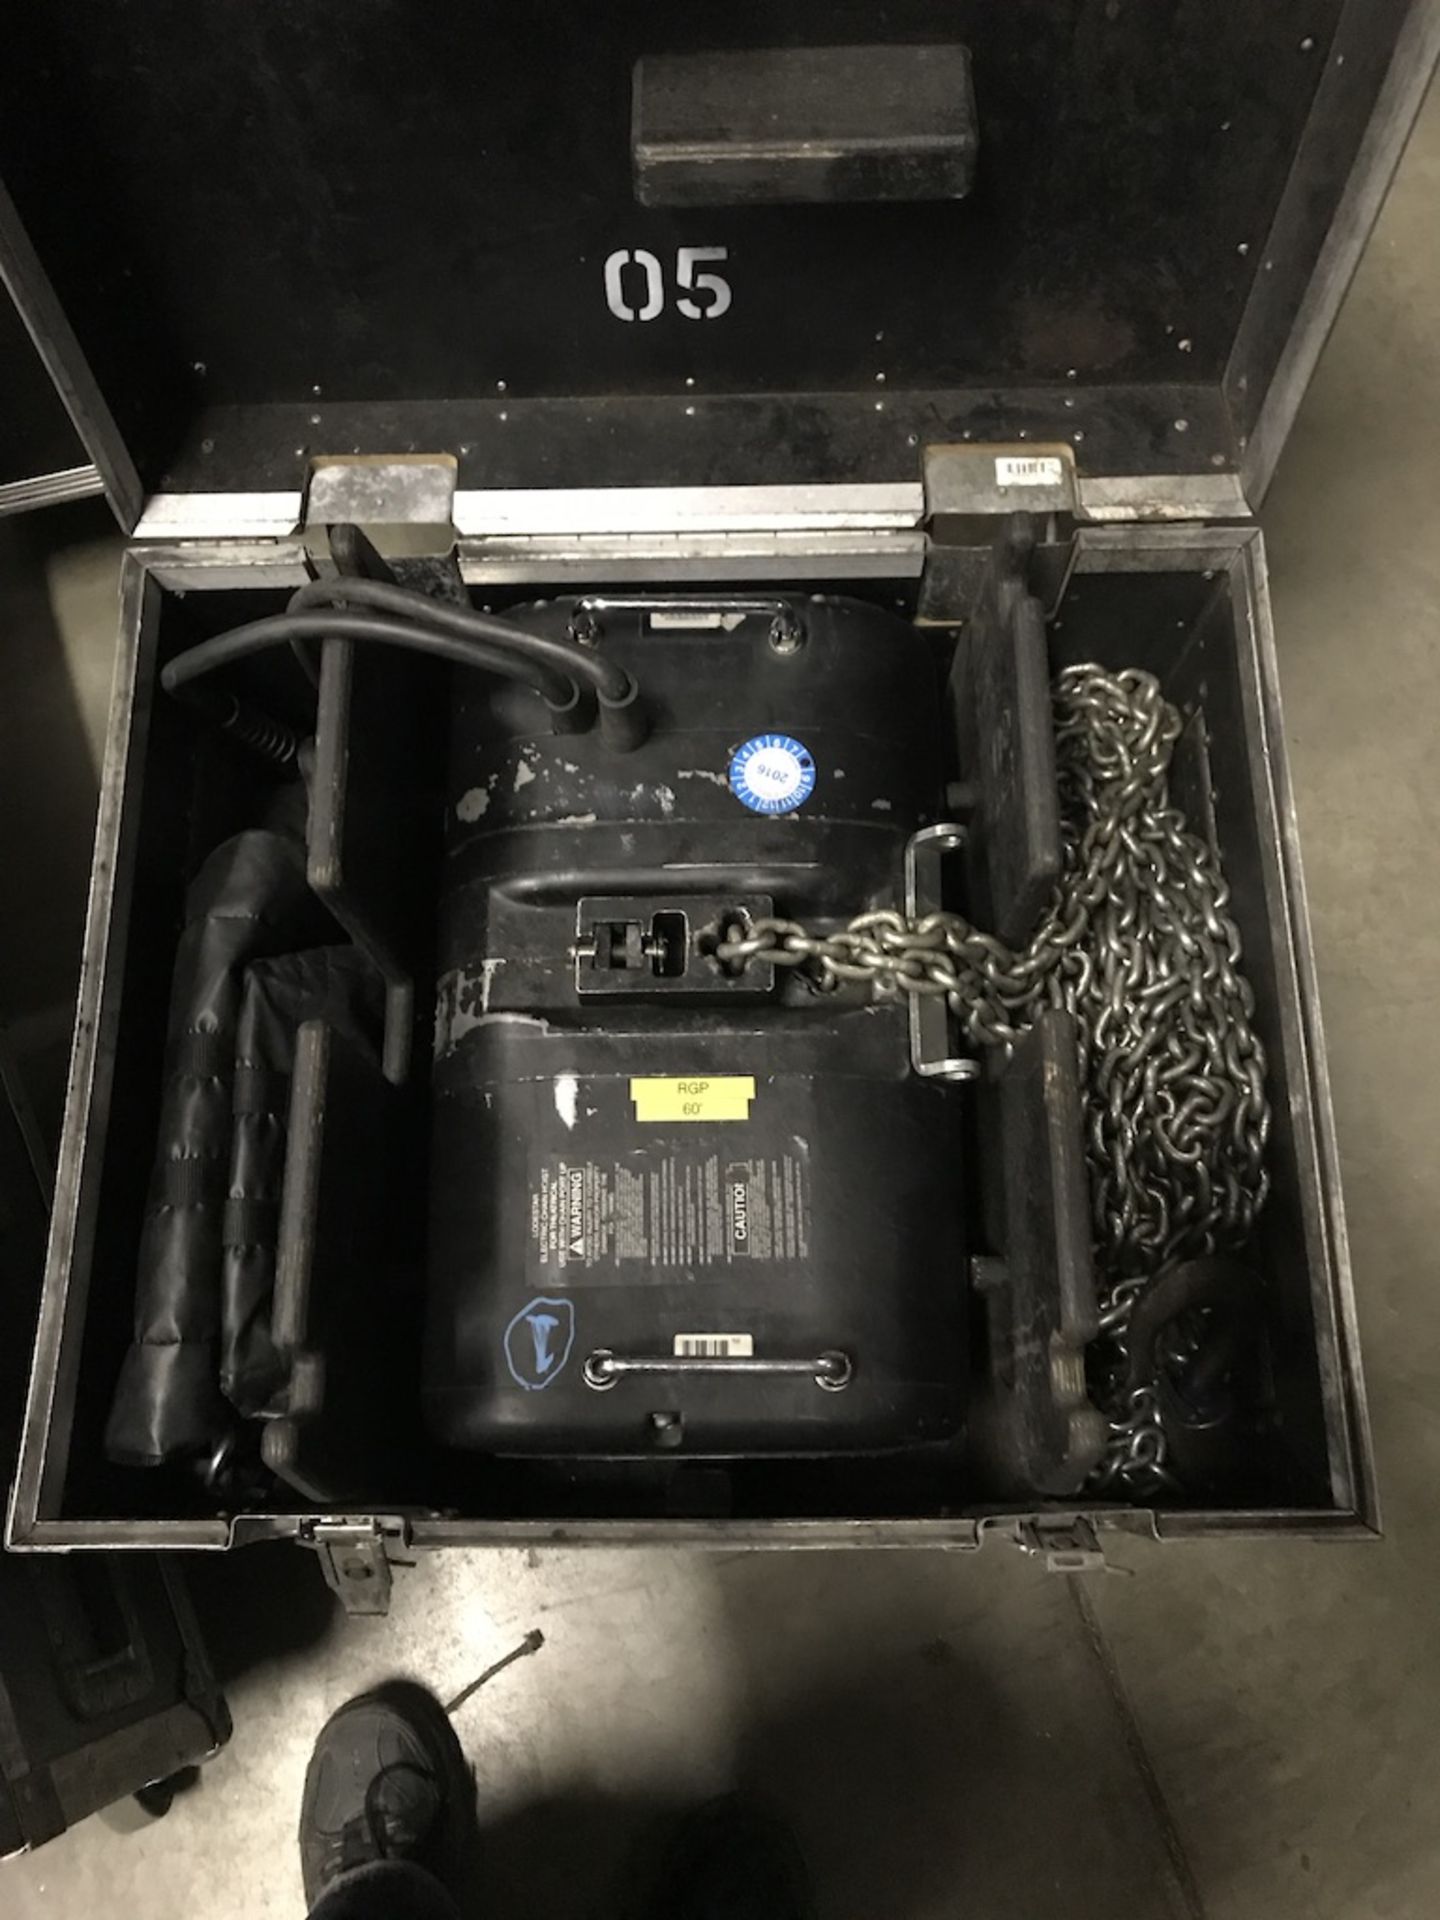 LOT OF: (1) ATLANTA RIGGING SYSTEMS LODESTAR ELECTRIC CHAIN HOIST RATED FOR 2 TON W/ 60' OF CHAIN - Image 2 of 4